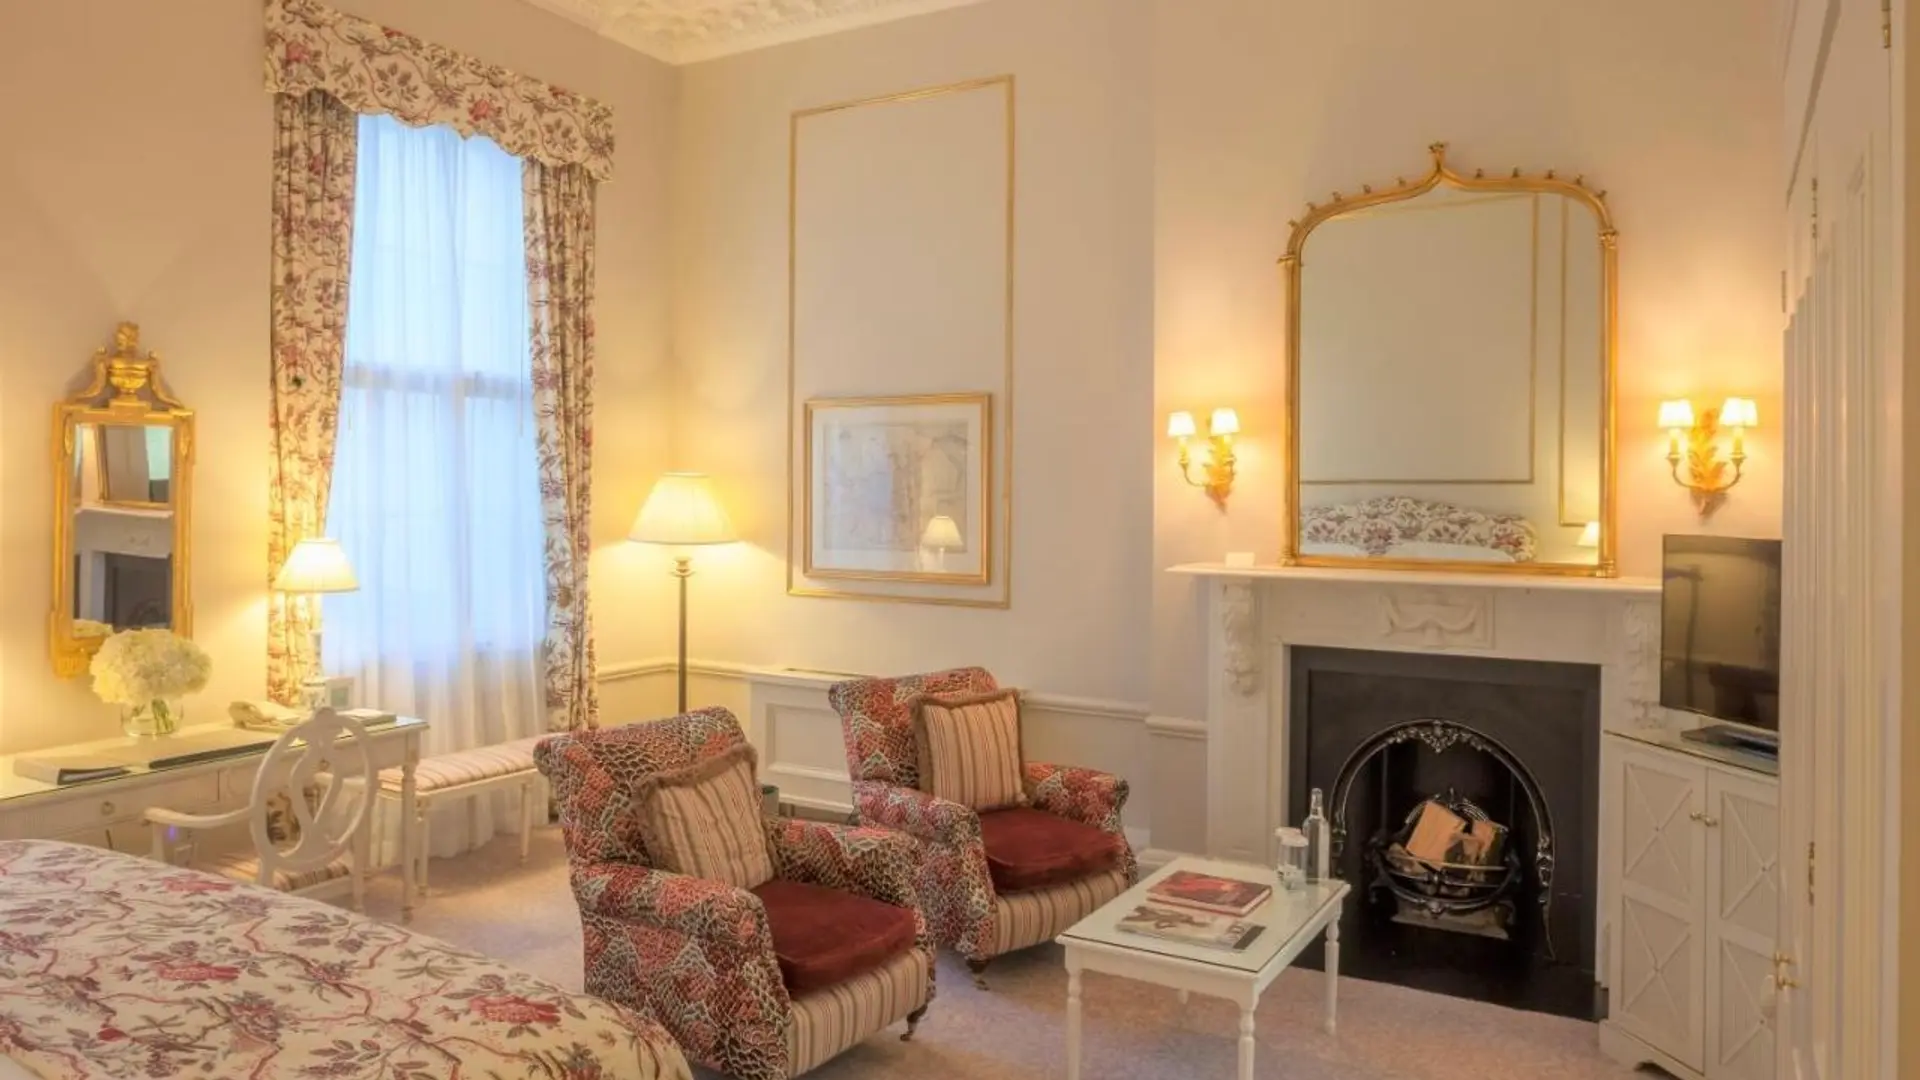 Hotel review Accommodation' - The Merrion Hotel - 3